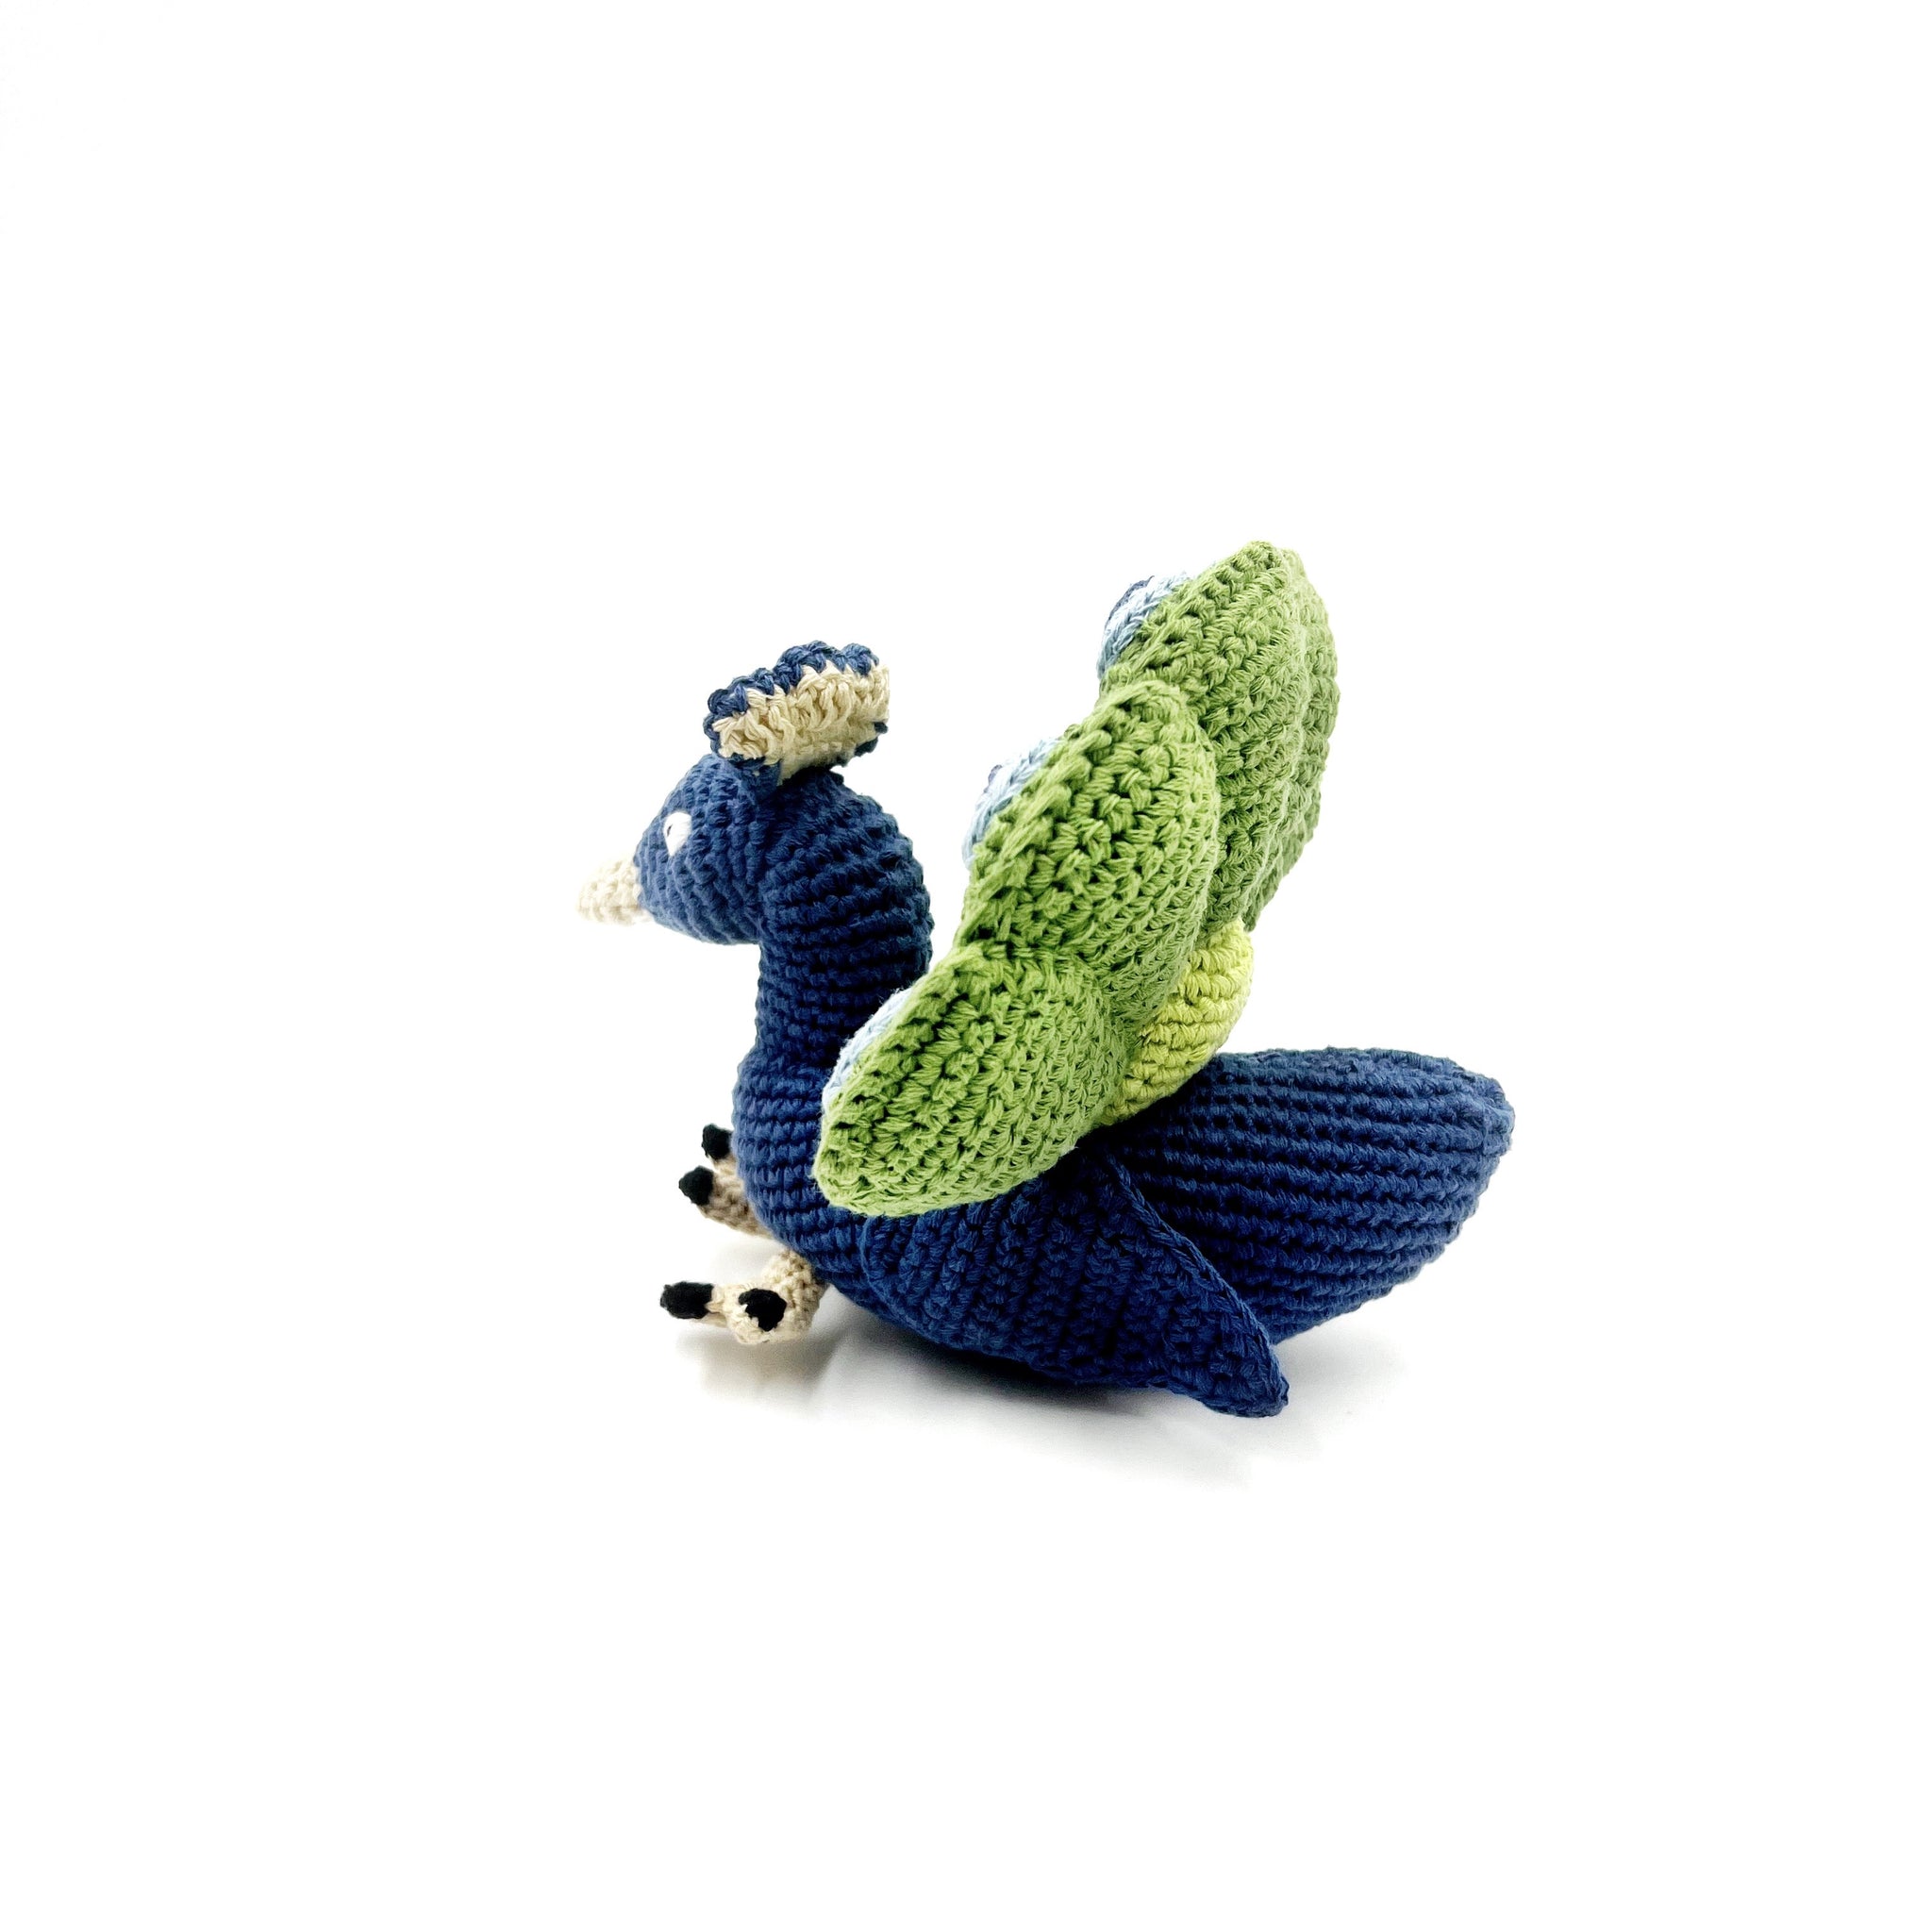 Peacock Rattle